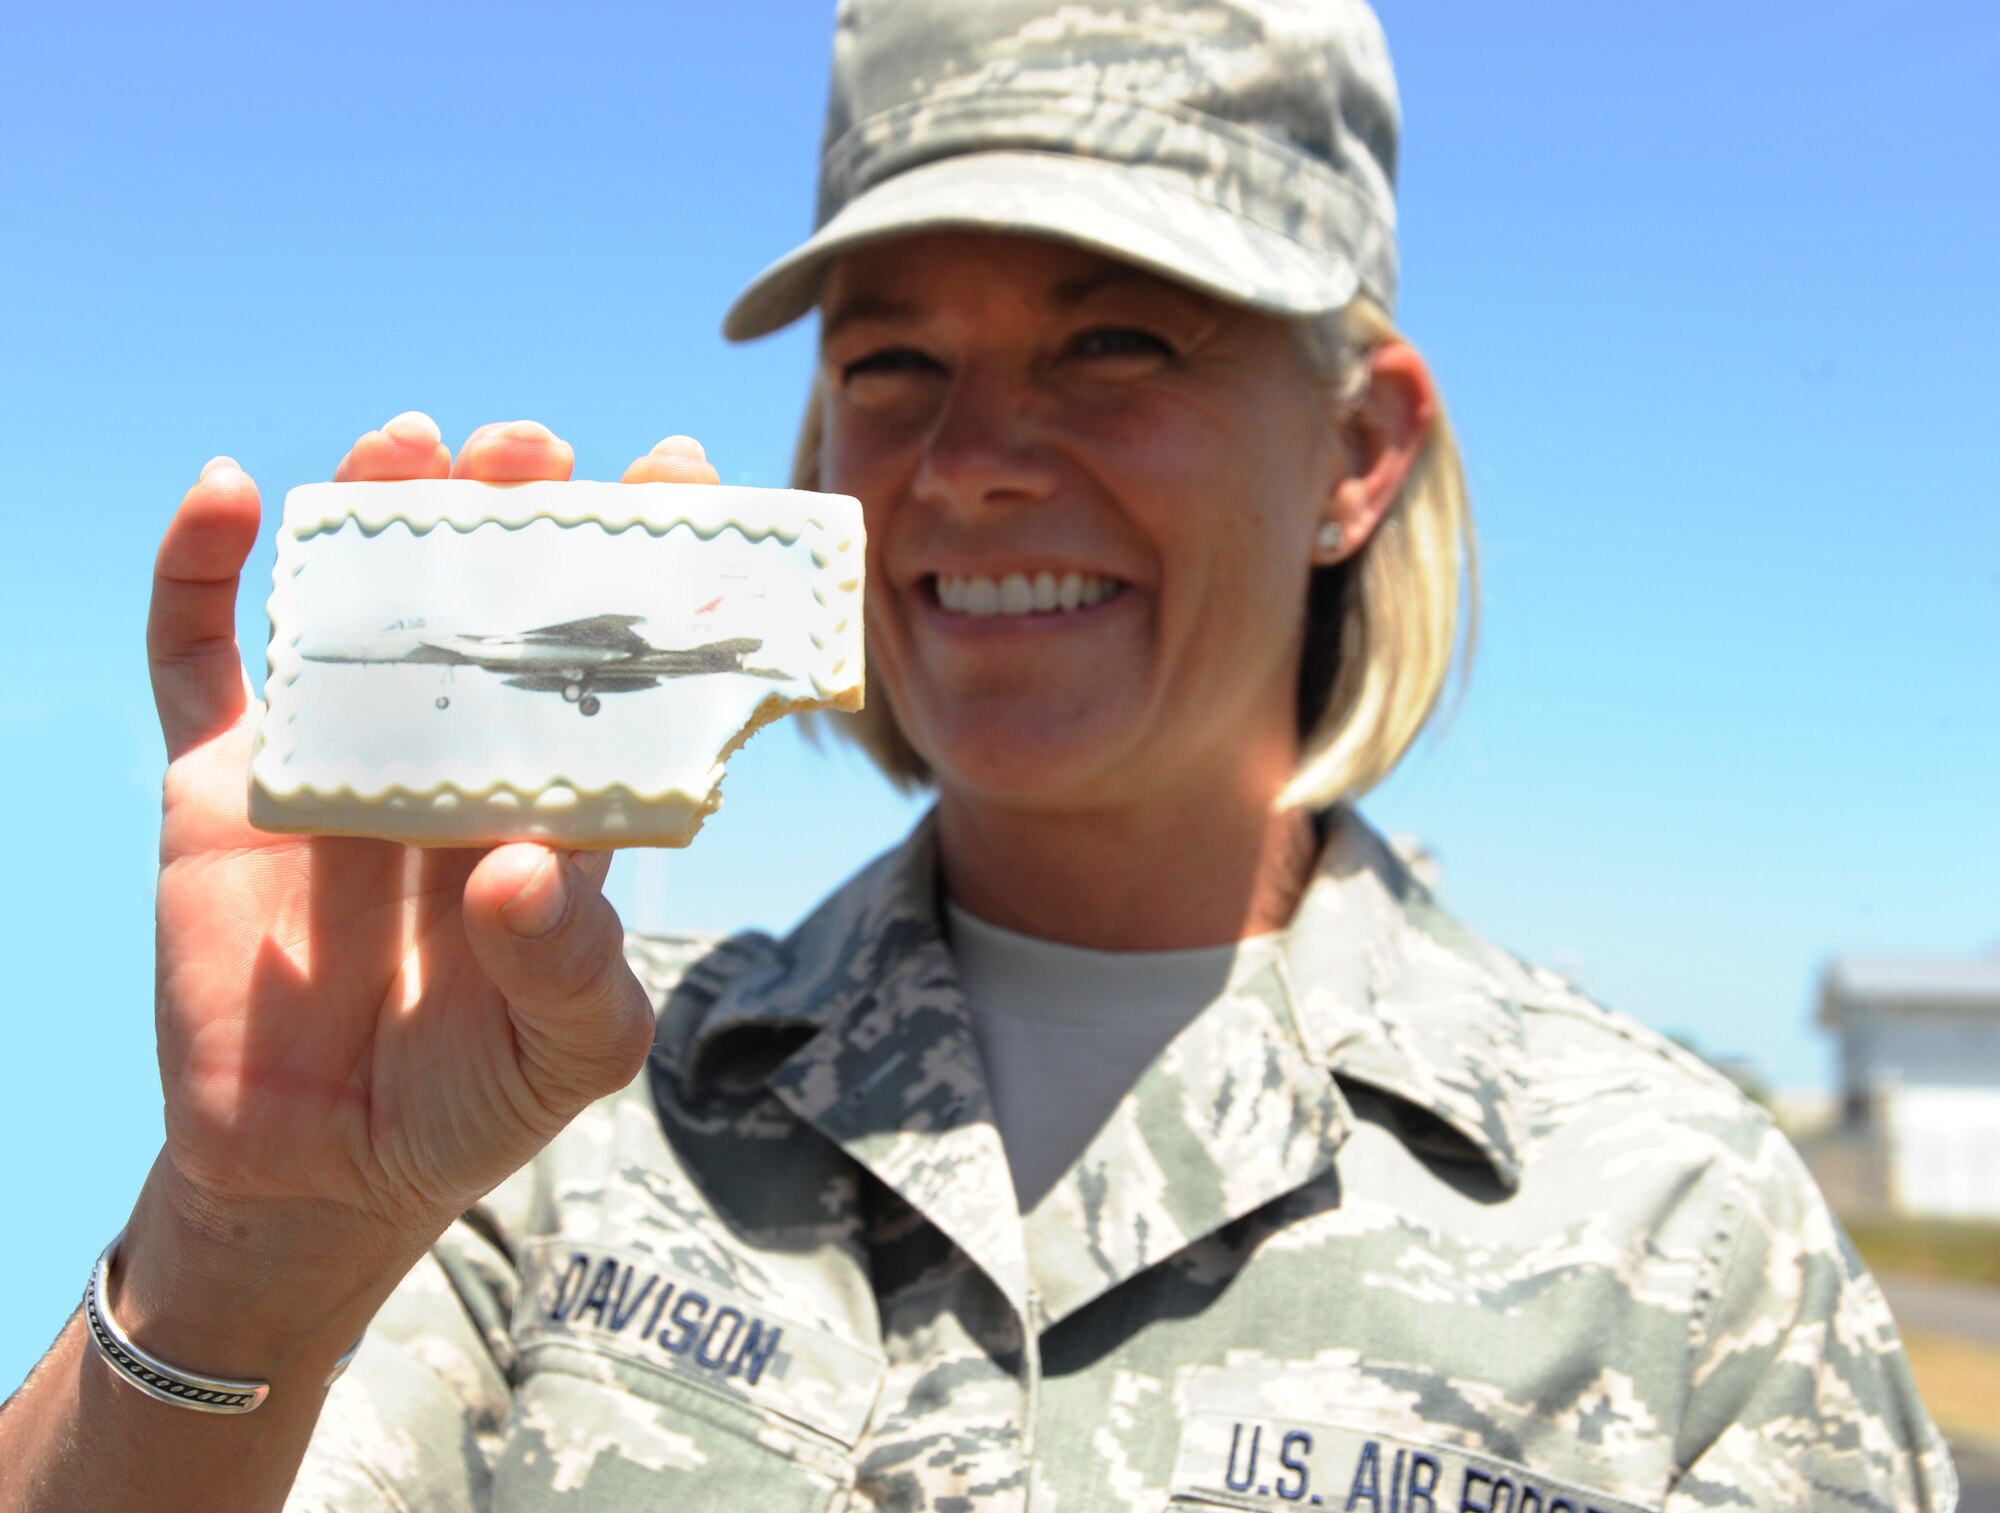 Master Sgt. Shelly Davison, assigned to the 142nd Fighter Wing Public Affairs Office, shows off a cookie after the official opening of the new Portland Air National Guard Base Service Station, June 5, 2014. (Air National Guard photo by Tech. Sgt. John Hughel, 142nd Fighter Wing Public Affairs/Released)